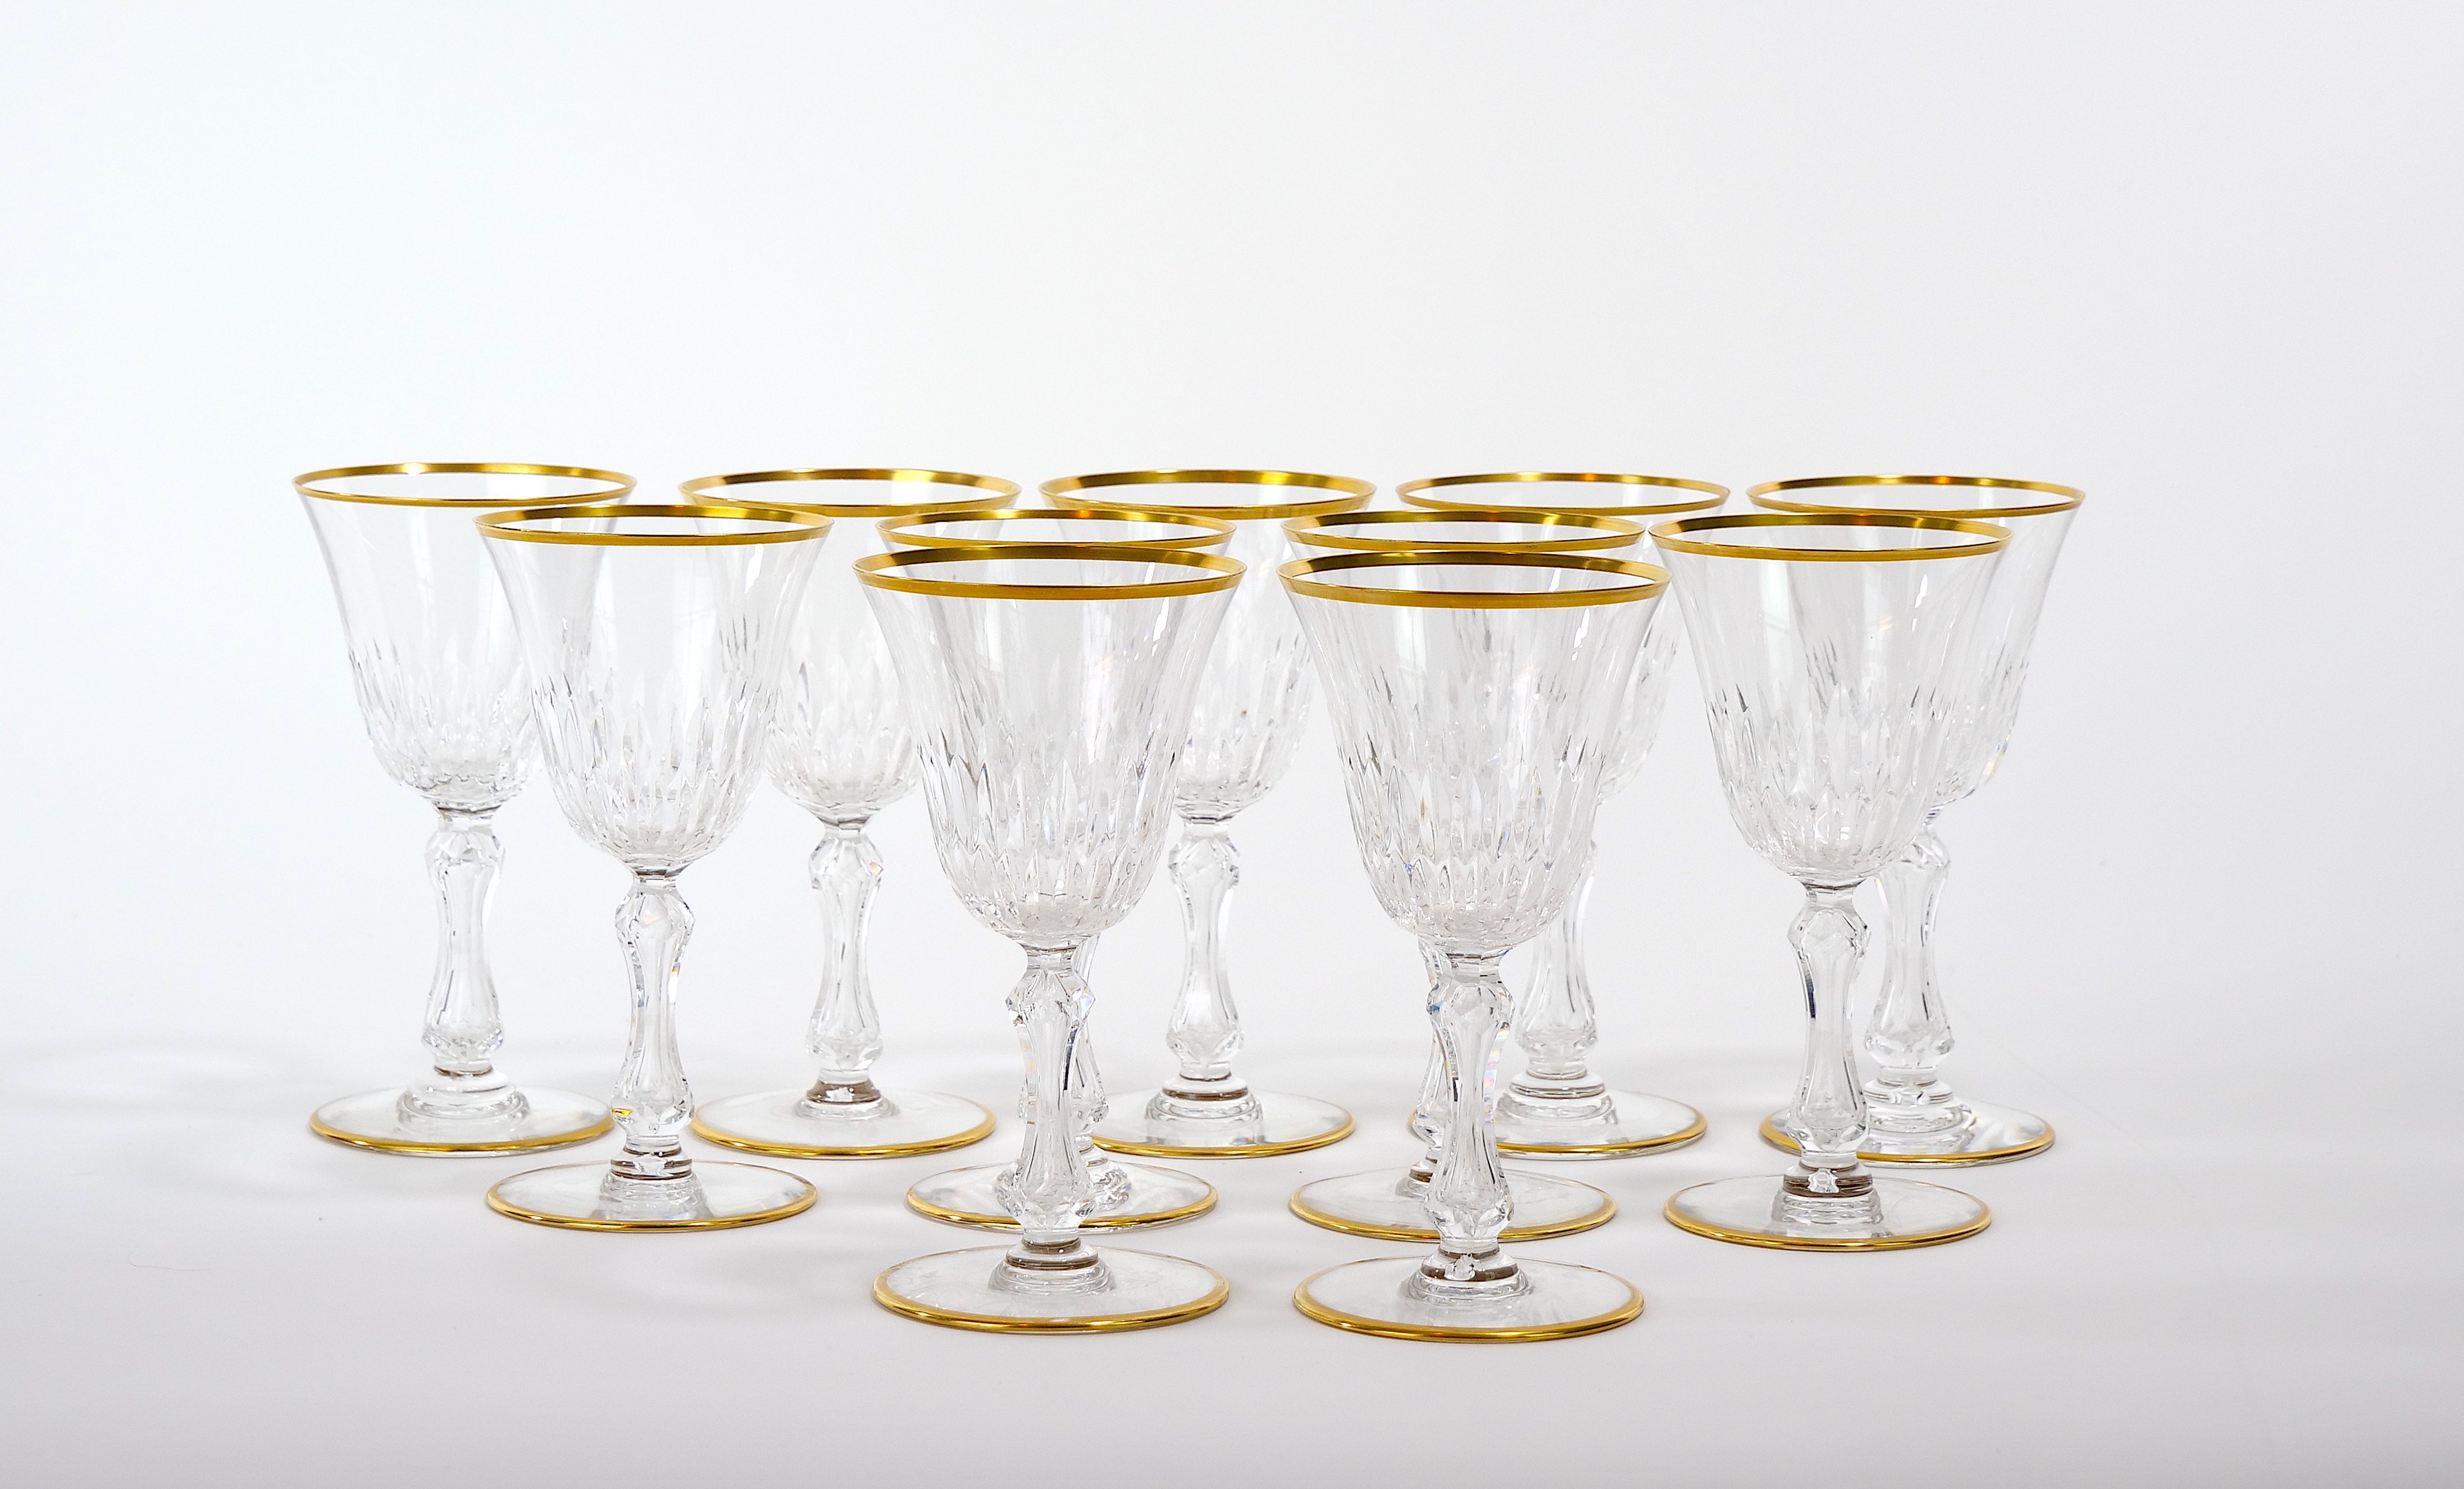 Richly hand cut and mouth blown with hand gilt gold trim top / base barware and tableware glassware service for 10 people. Each glass features a deep cuts that allow the light to retract and shine to a brilliant finish from any angle. Mouth blown